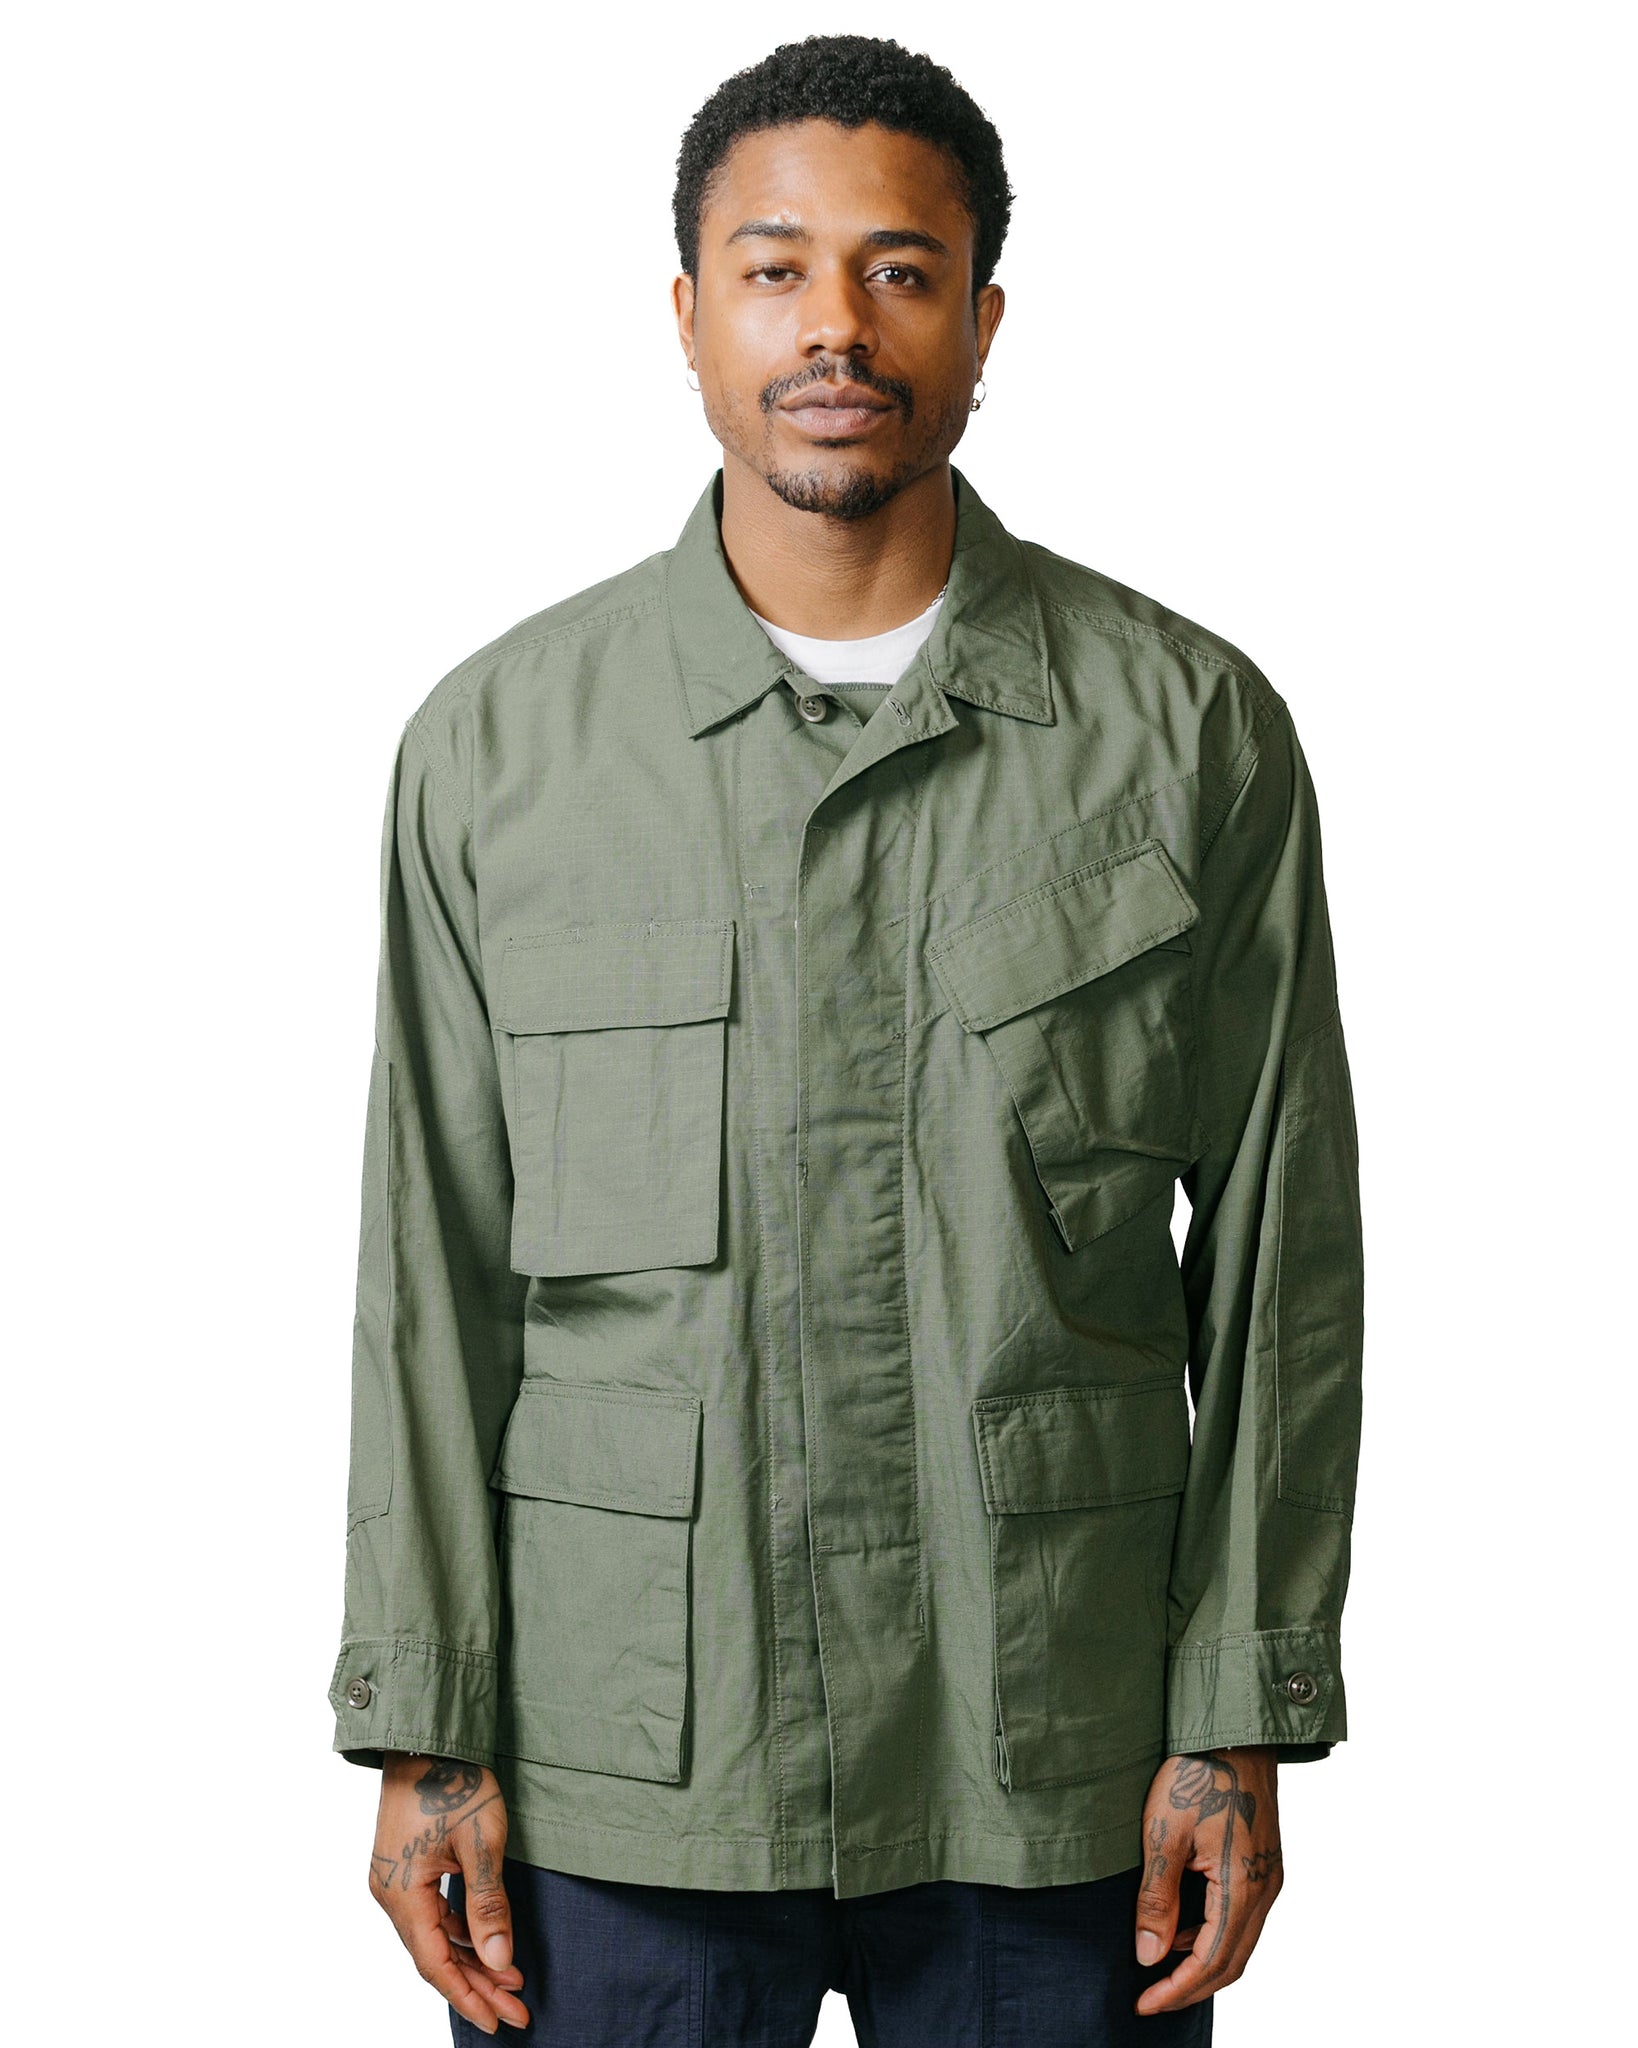 Engineered Garments BDU Jacket Olive Cotton Ripstop model front